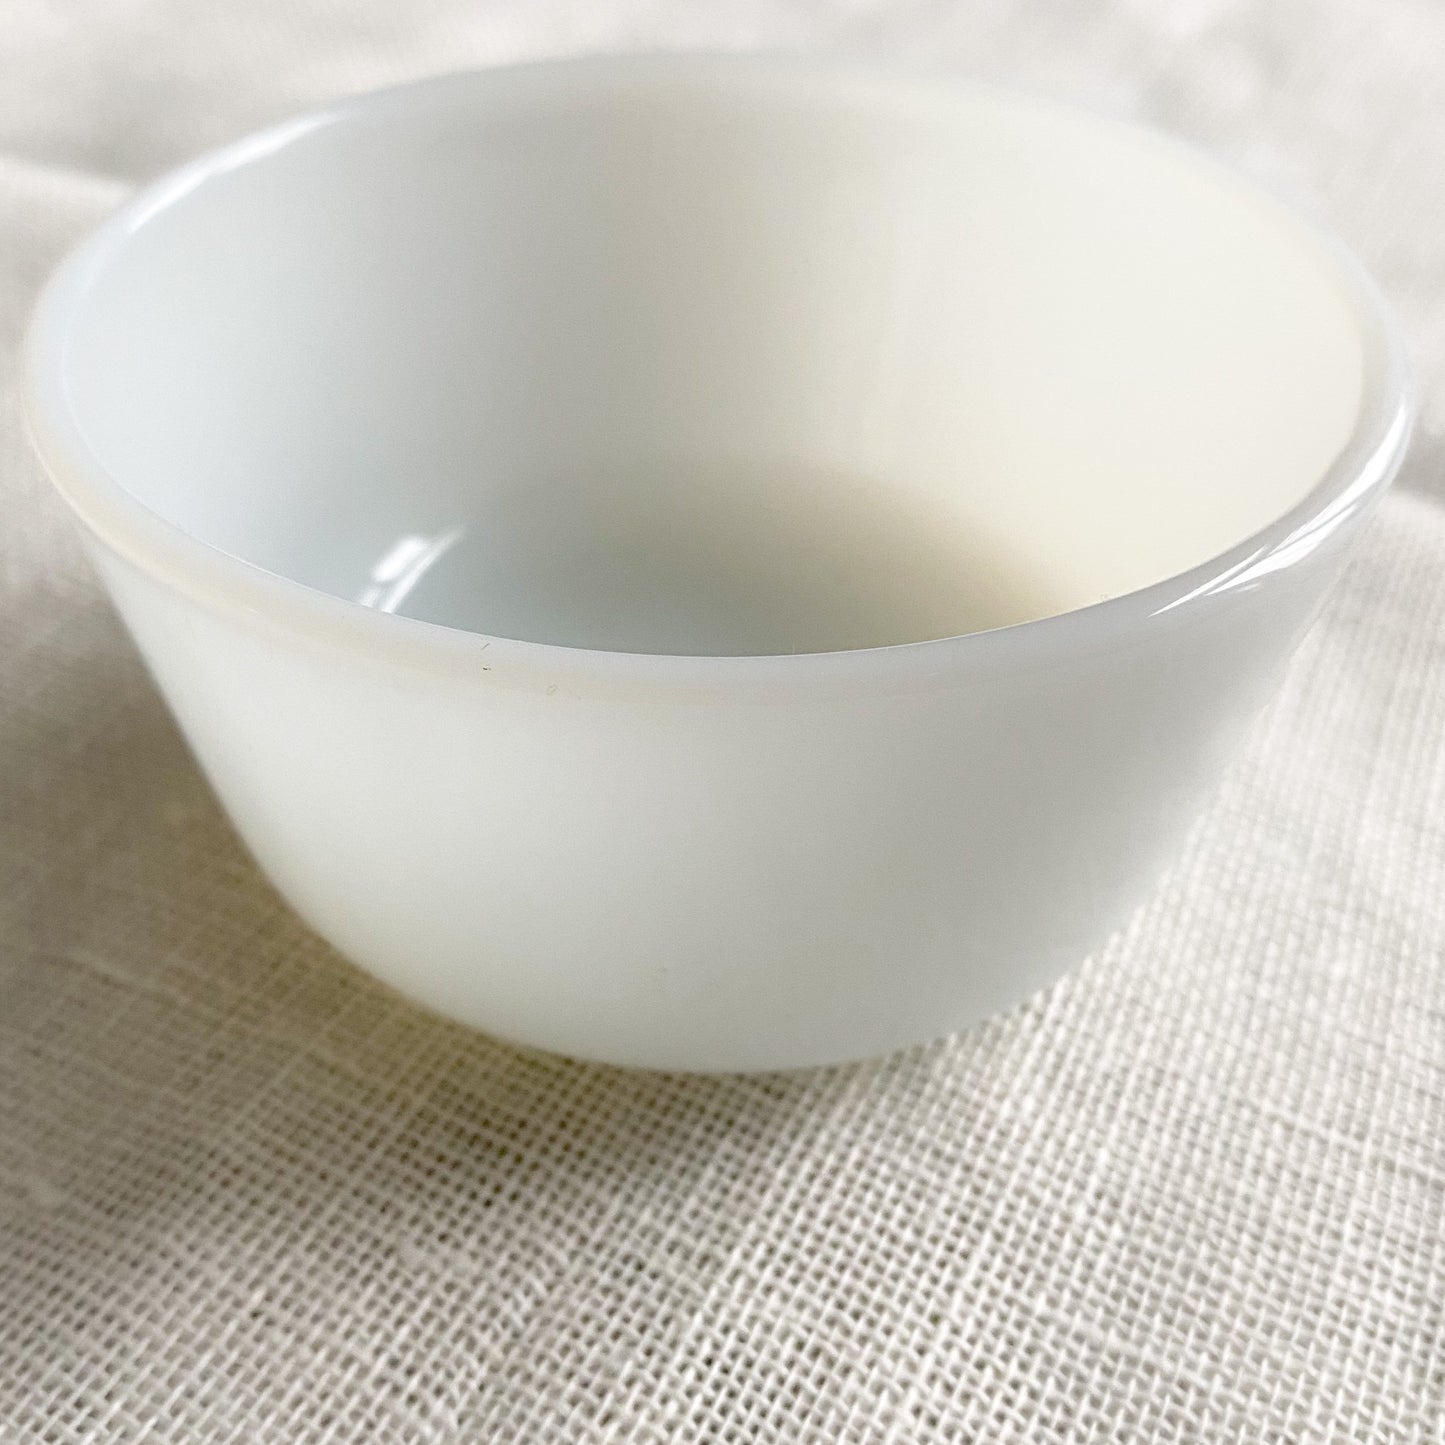 Harley Sustainable Vintage Milk Glass Jewelry Dish - Bellestyle